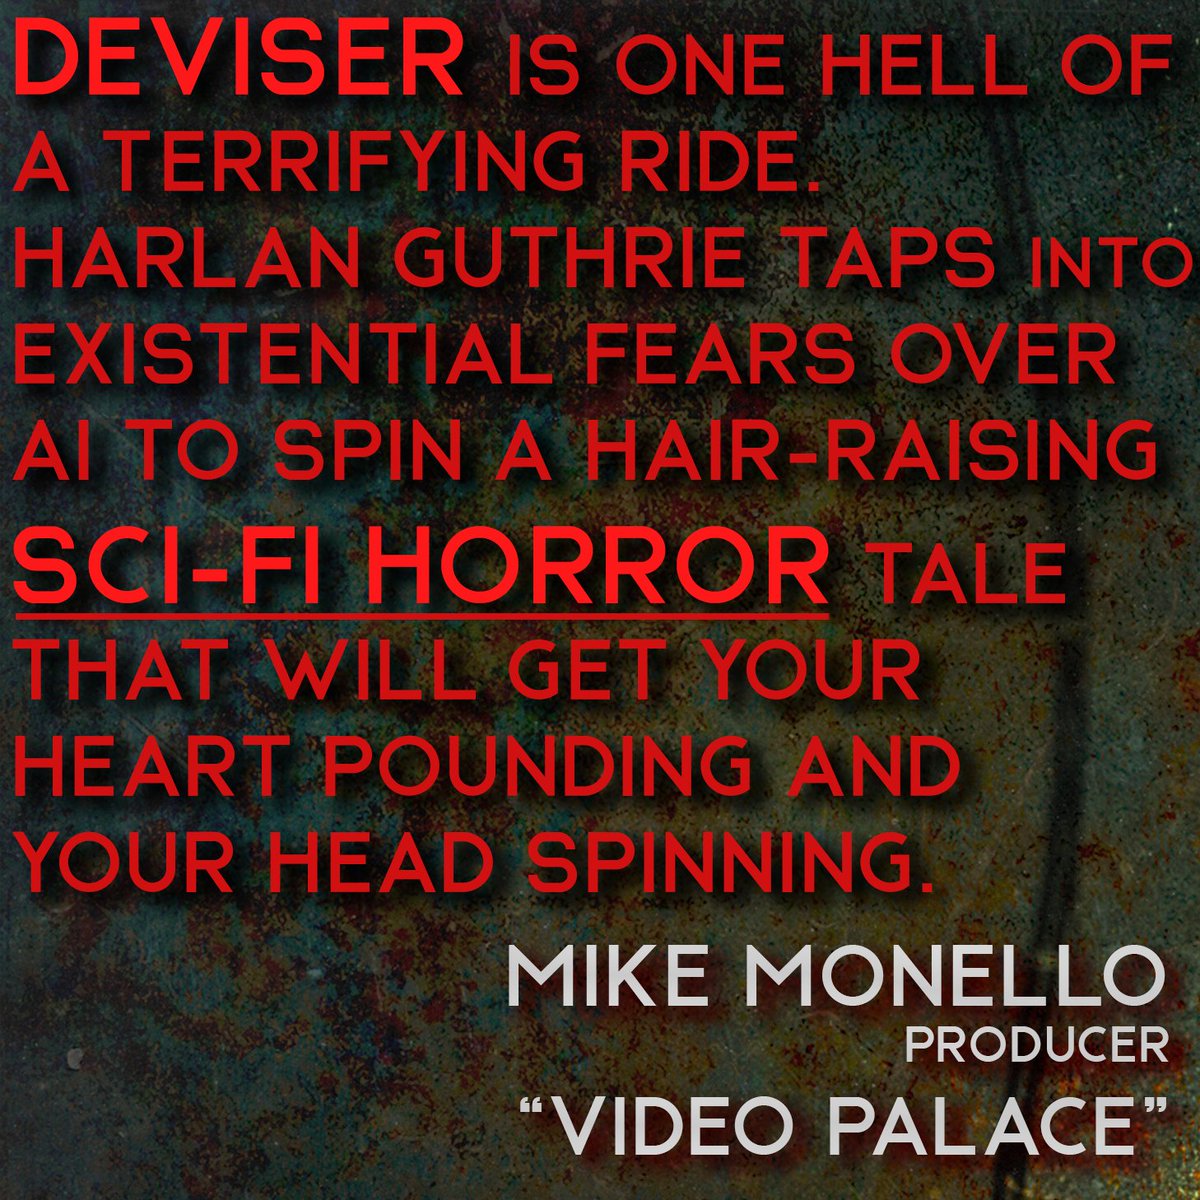 3 Days Until #Deviser   

Thank you to @mikemonello, producer of @Shudder's #VideoPalace for this amazing early review!

DEVISER is everywhere May 1st      

#VideoPalacePodcast #AudioDrama #Horror #HorrorPodcast #Malevolent #RustyQuill 

@TheRustyQuill